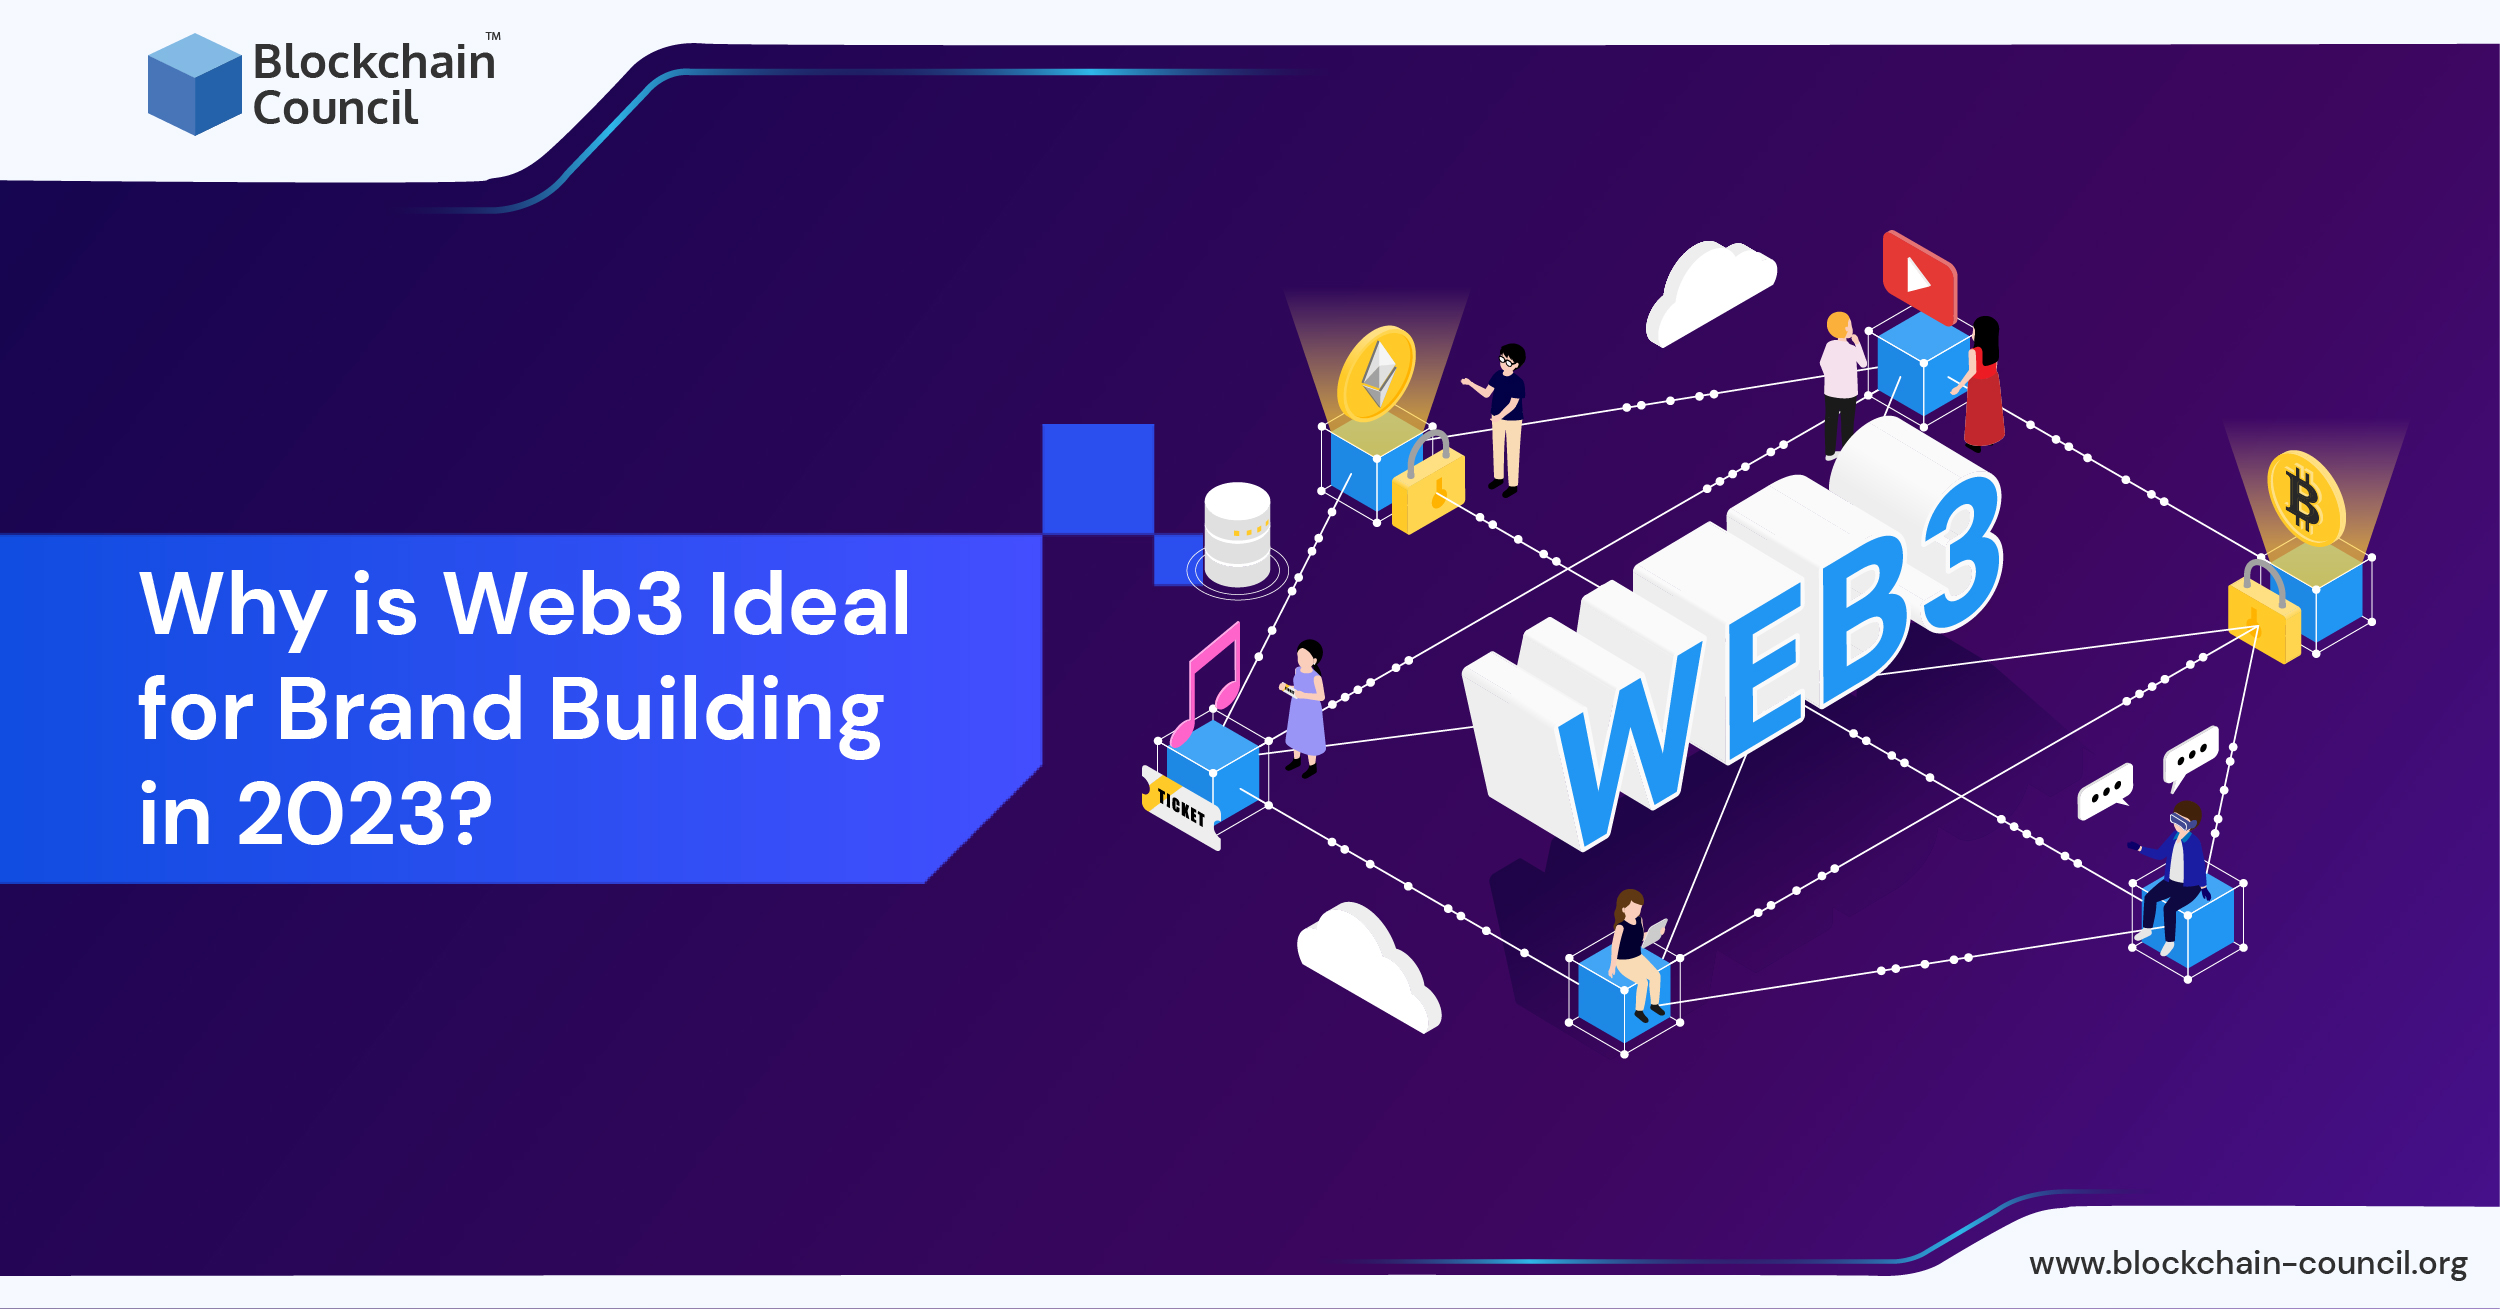 Why is Web3 Ideal for Brand Building in 2023?